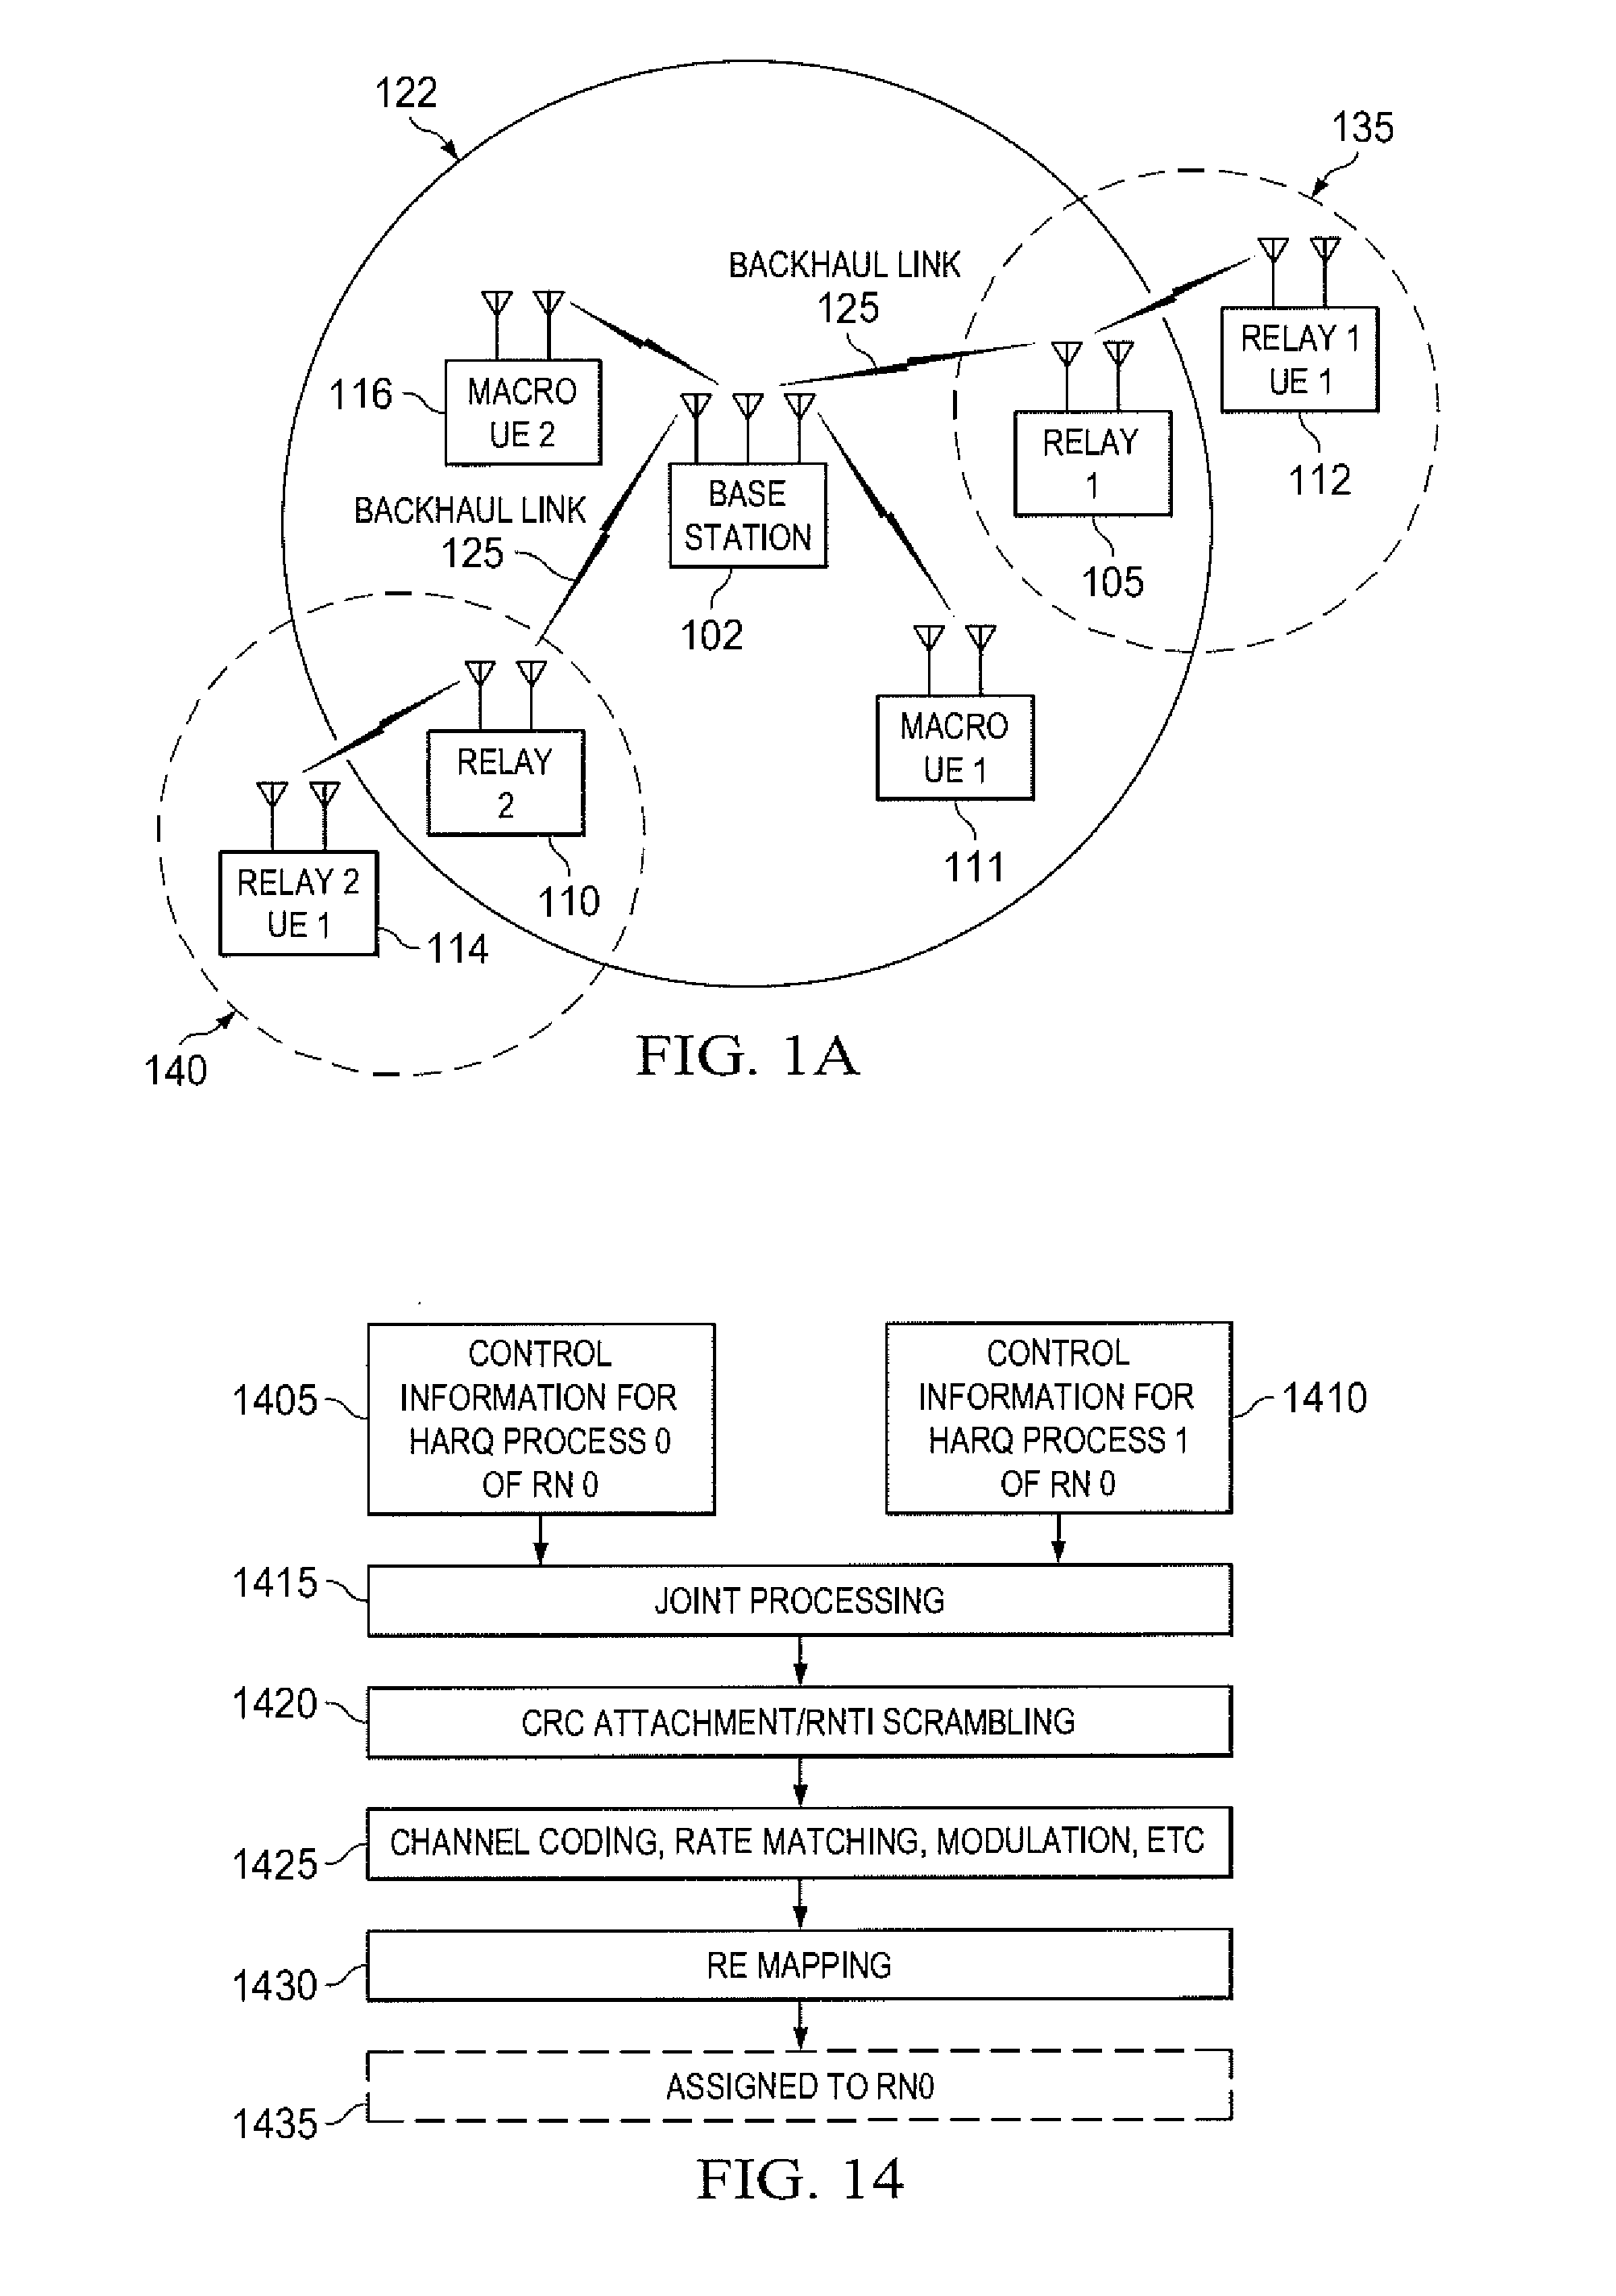 Control design for backhaul relay to support multiple HARQ processes